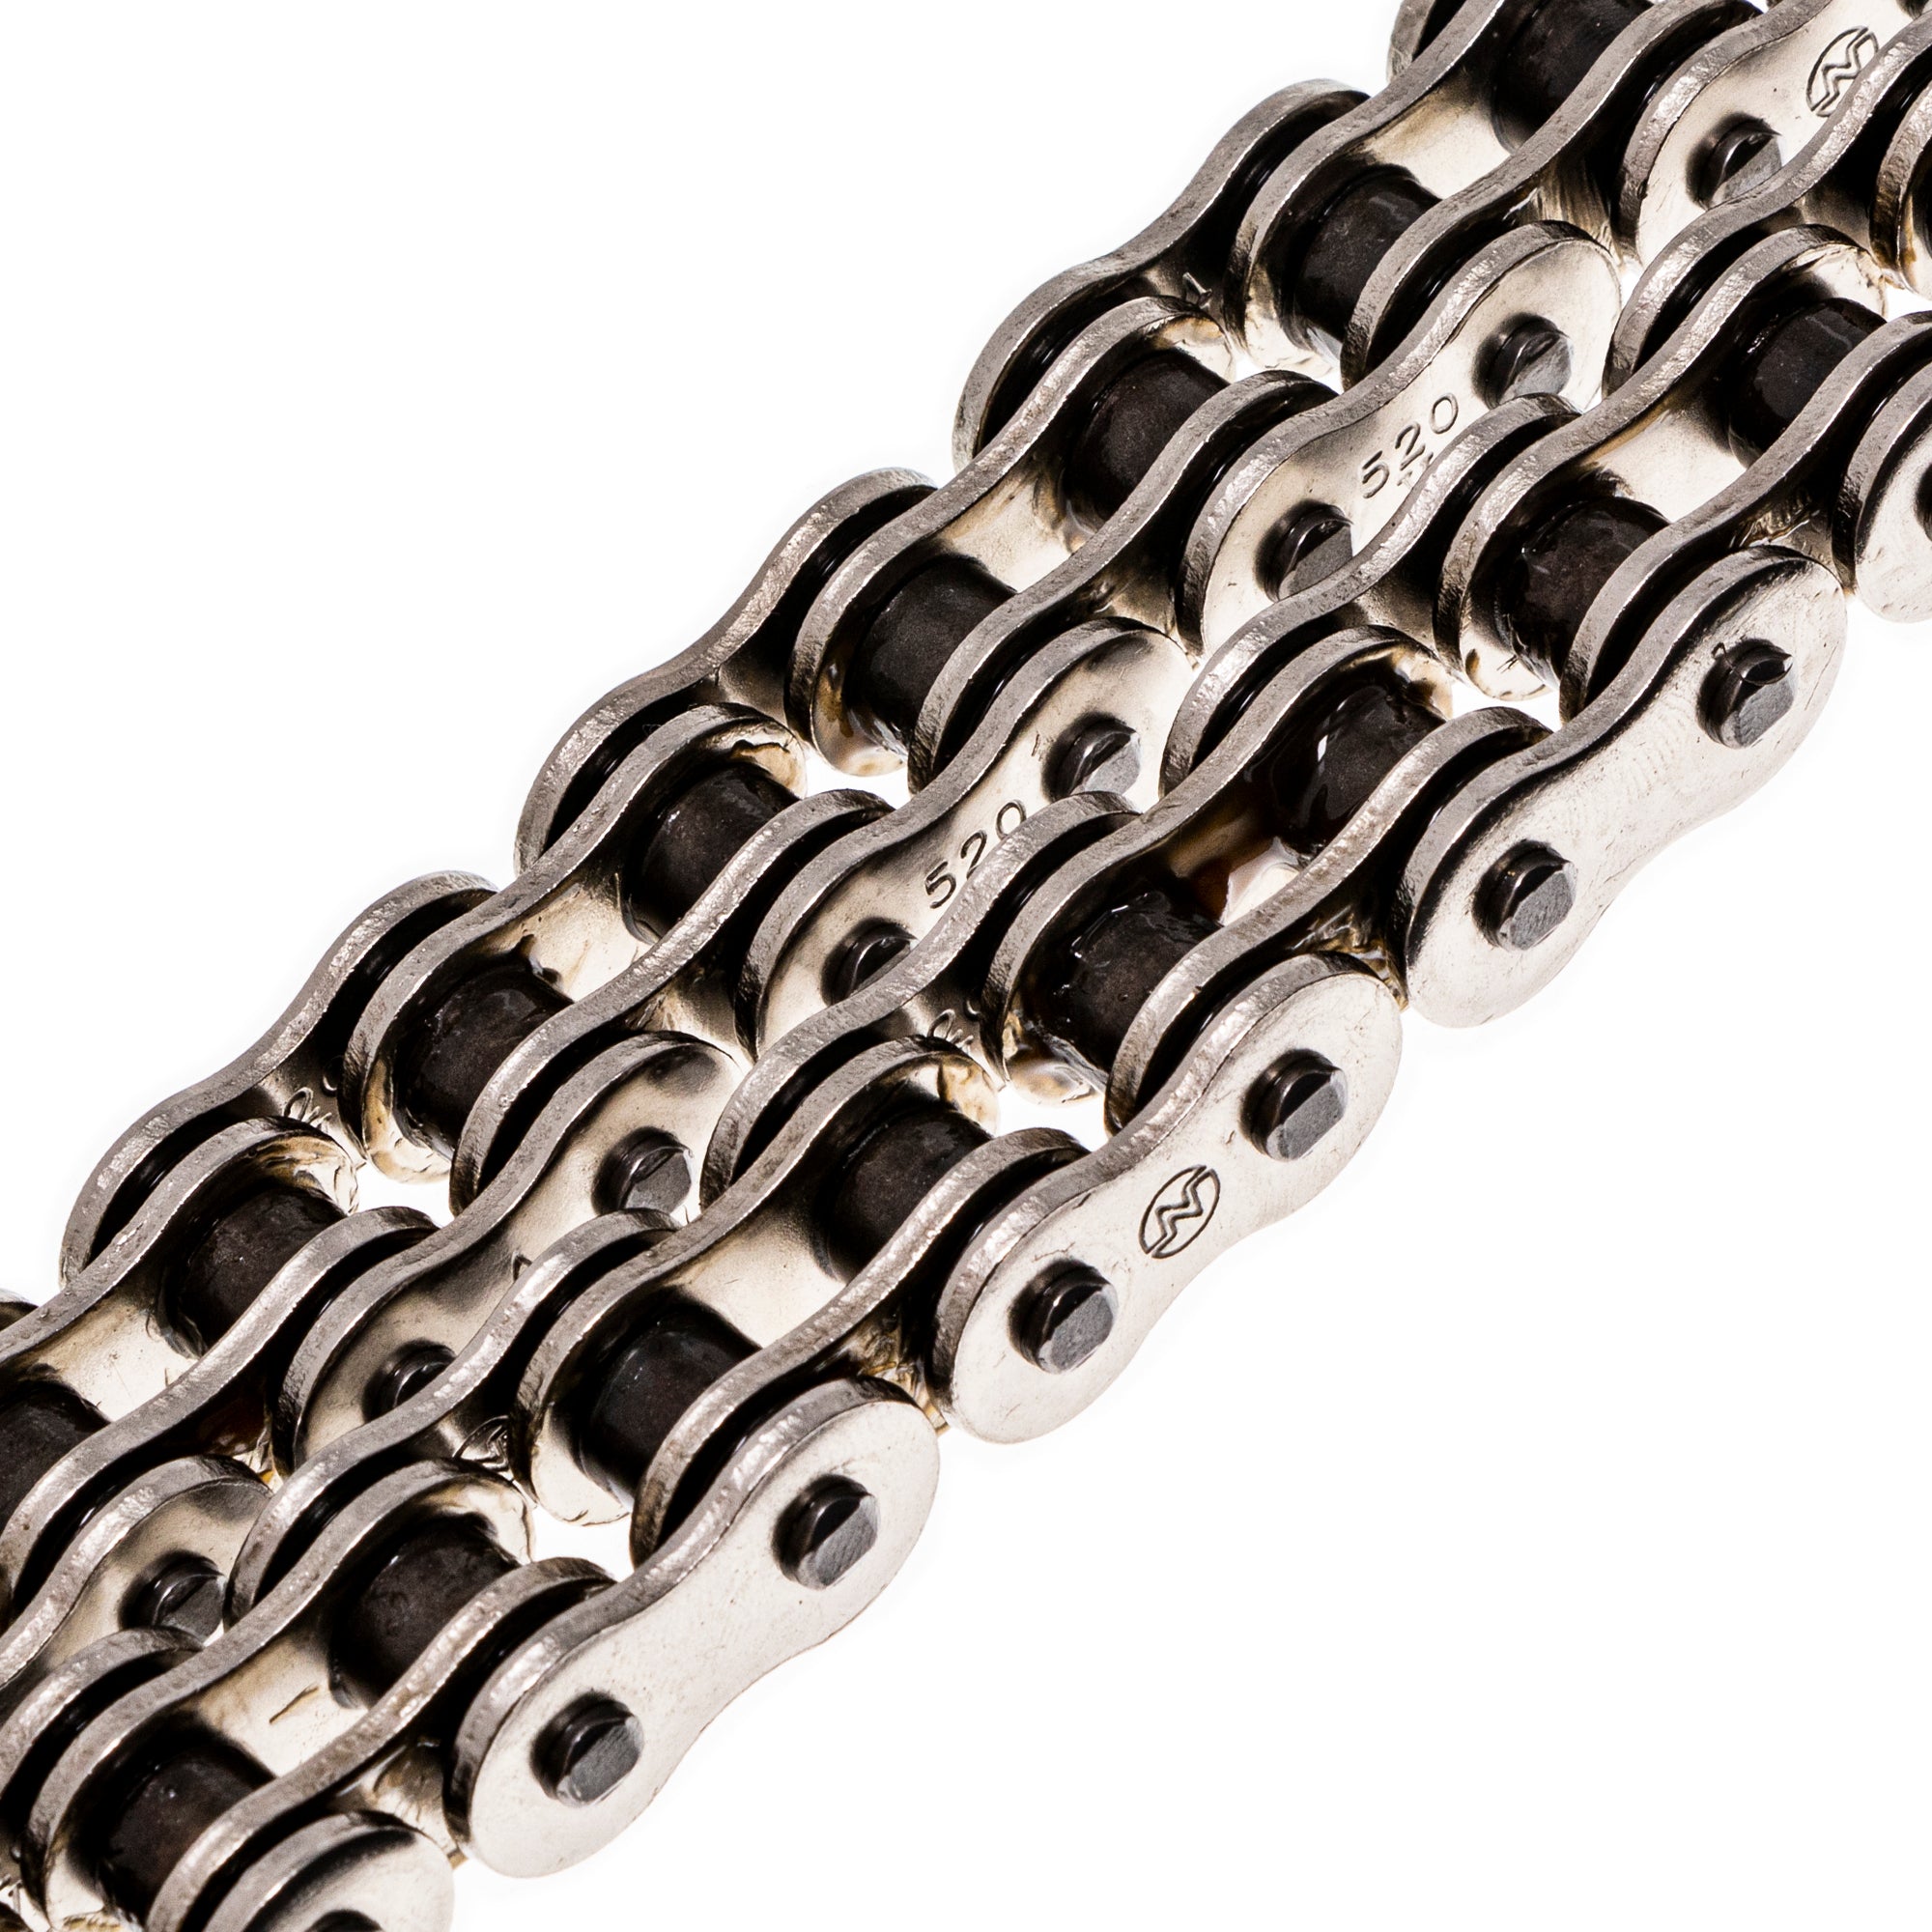 Drive Chain 118 O-Ring w/ Master Link for zOTHER Yamaha KTM WR250 WR125 TE250i TE250 NICHE 519-CDC2361H